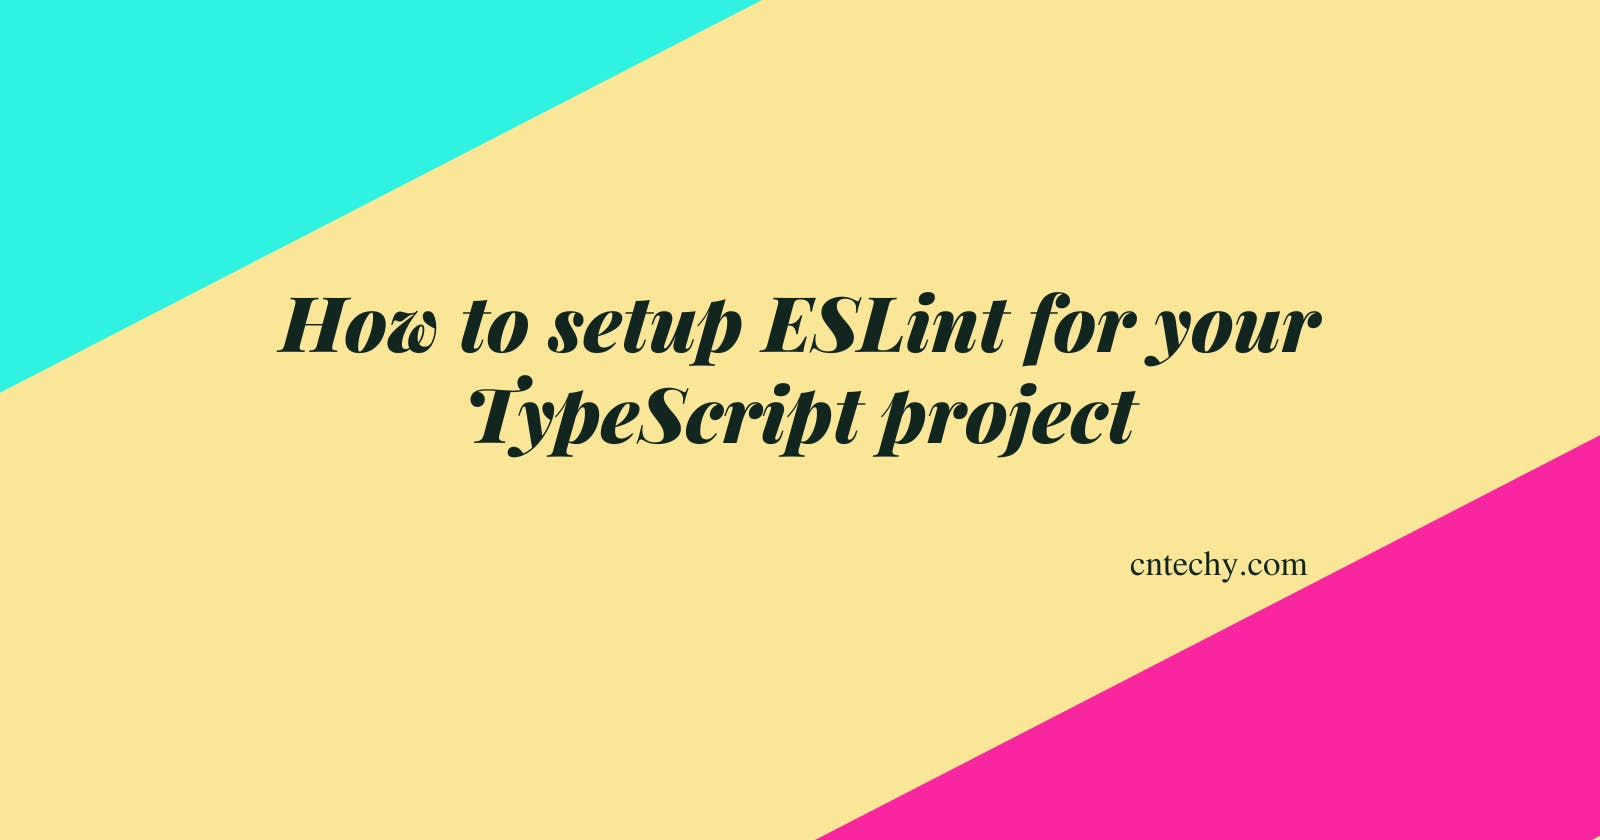 How to setup ESLint for your TypeScript project